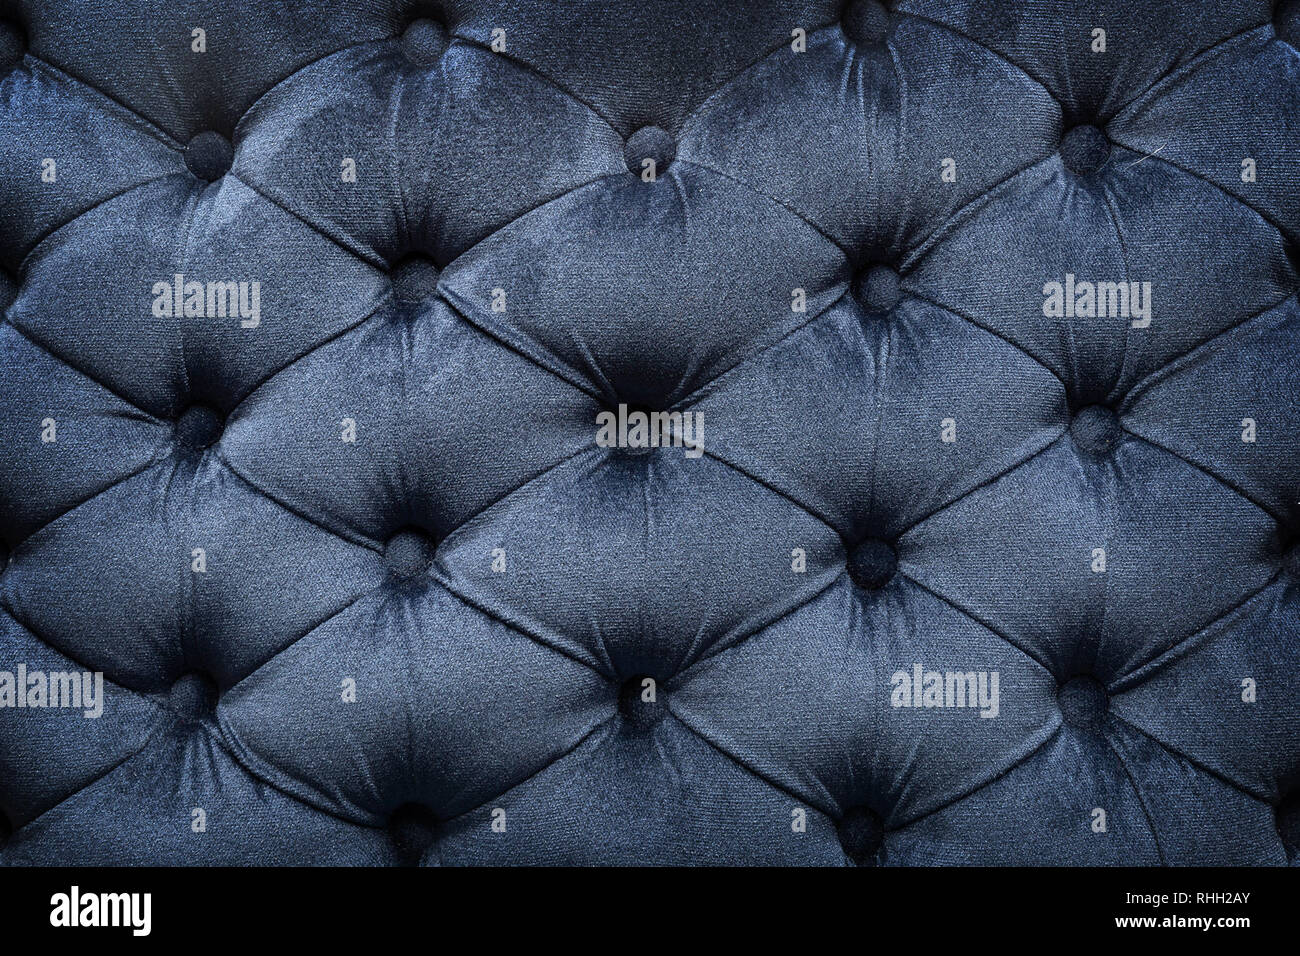 Quilted velvet dark fabric as a background Stock Photo